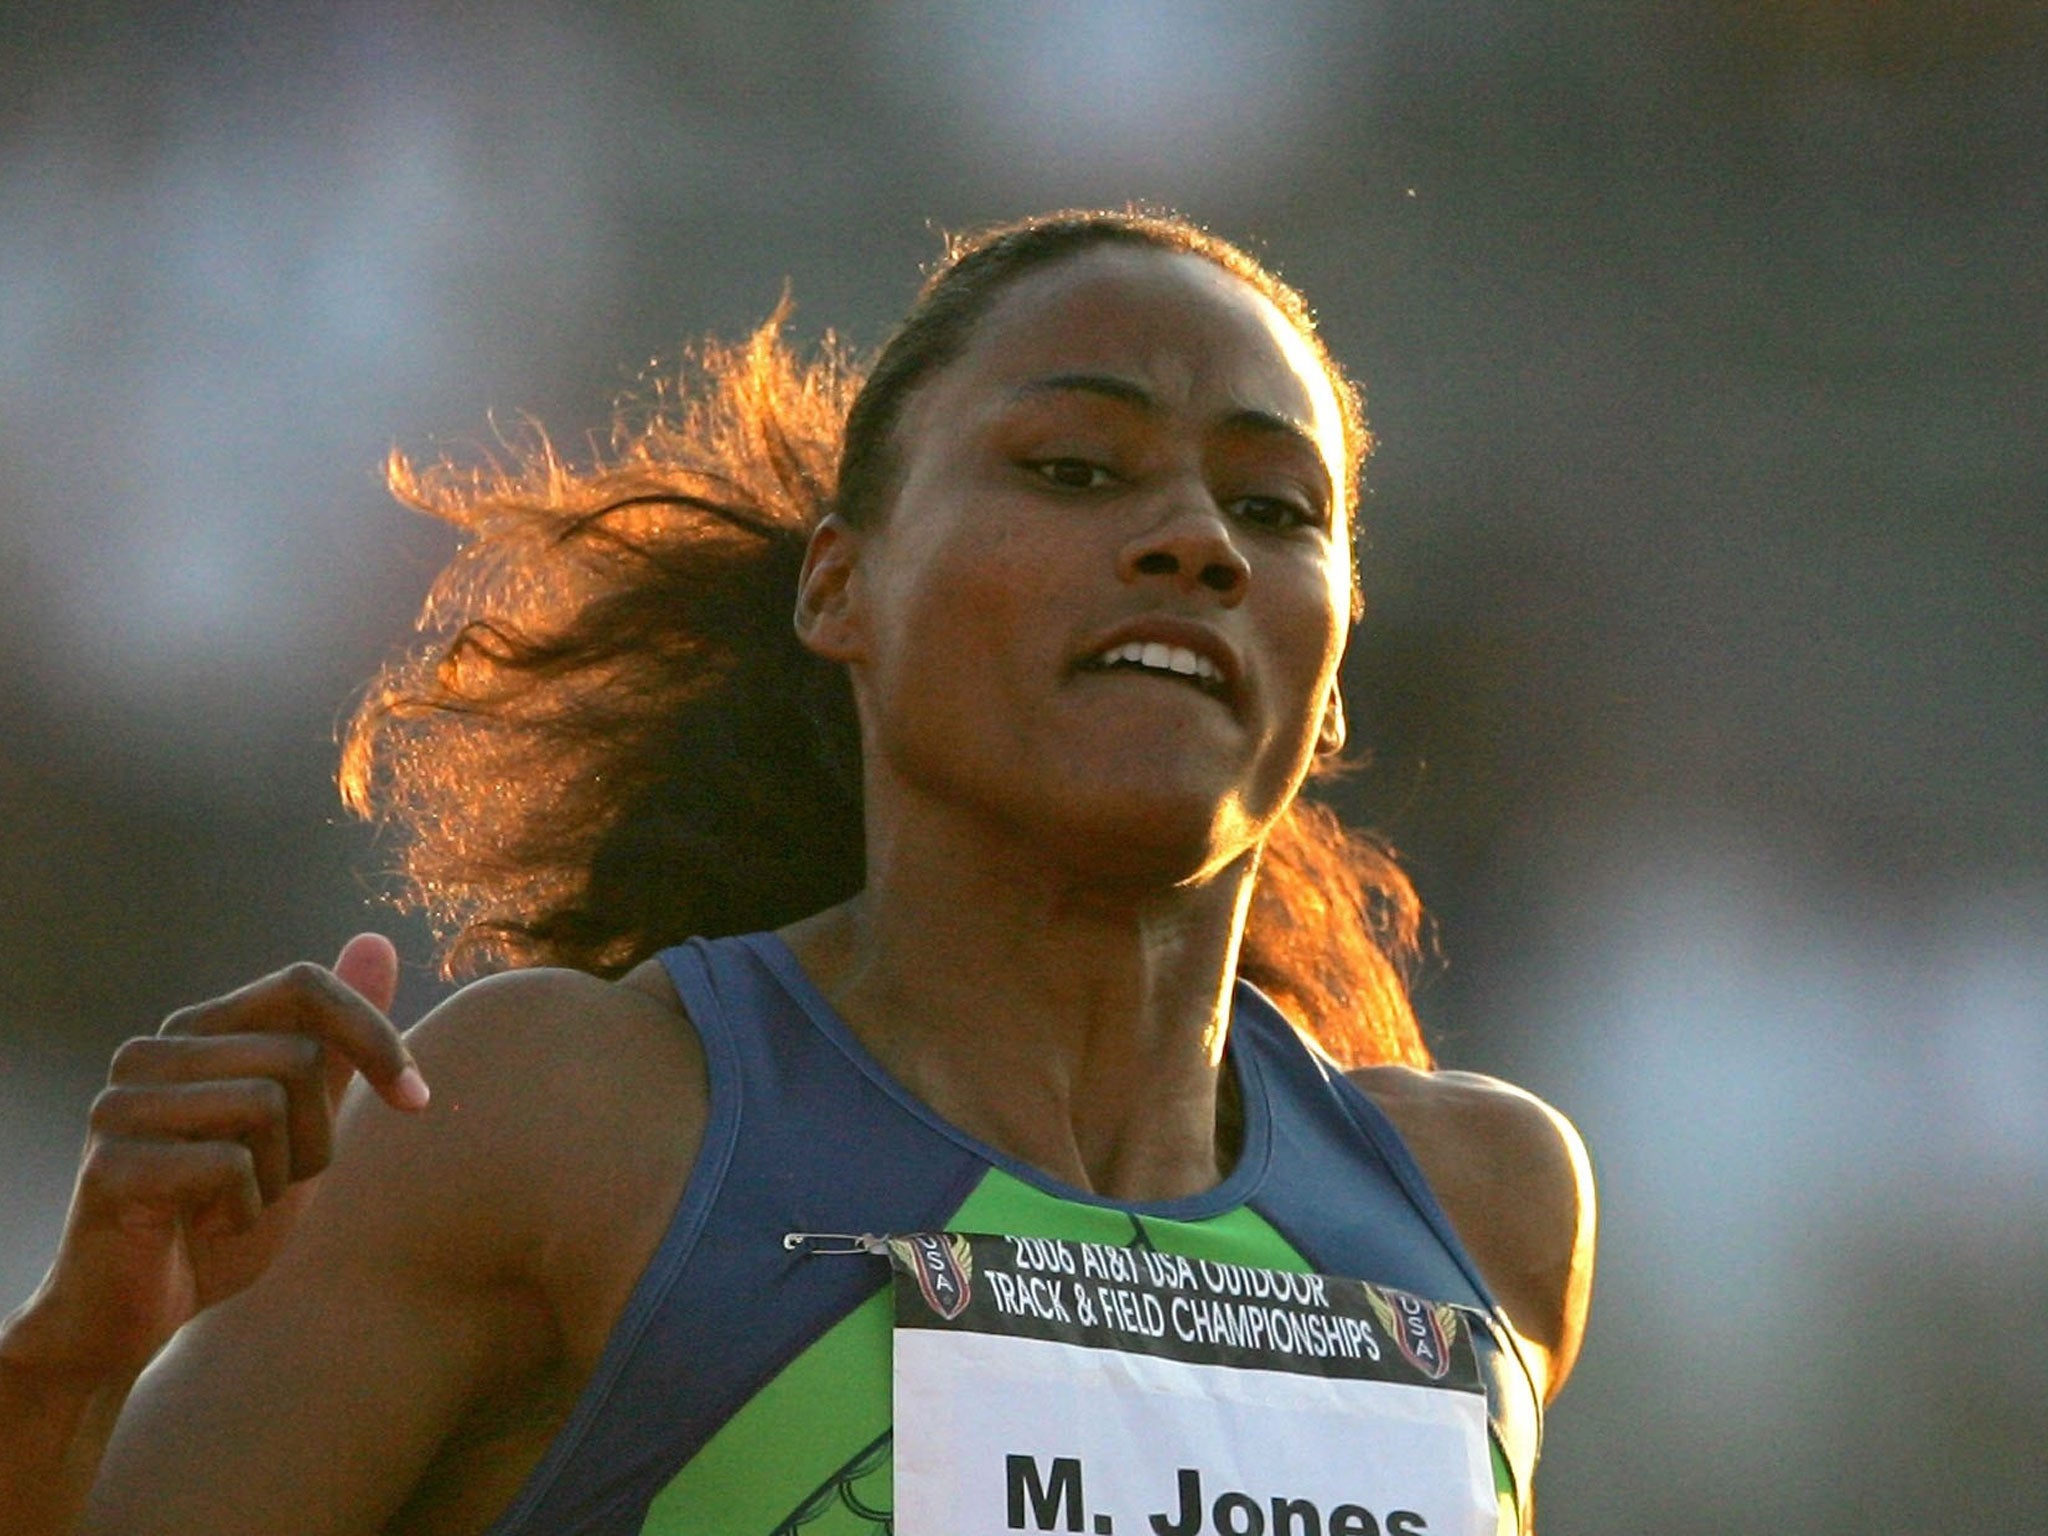 The 2003 Balco scandal ultimately brought down the US sprinter Marion Jones